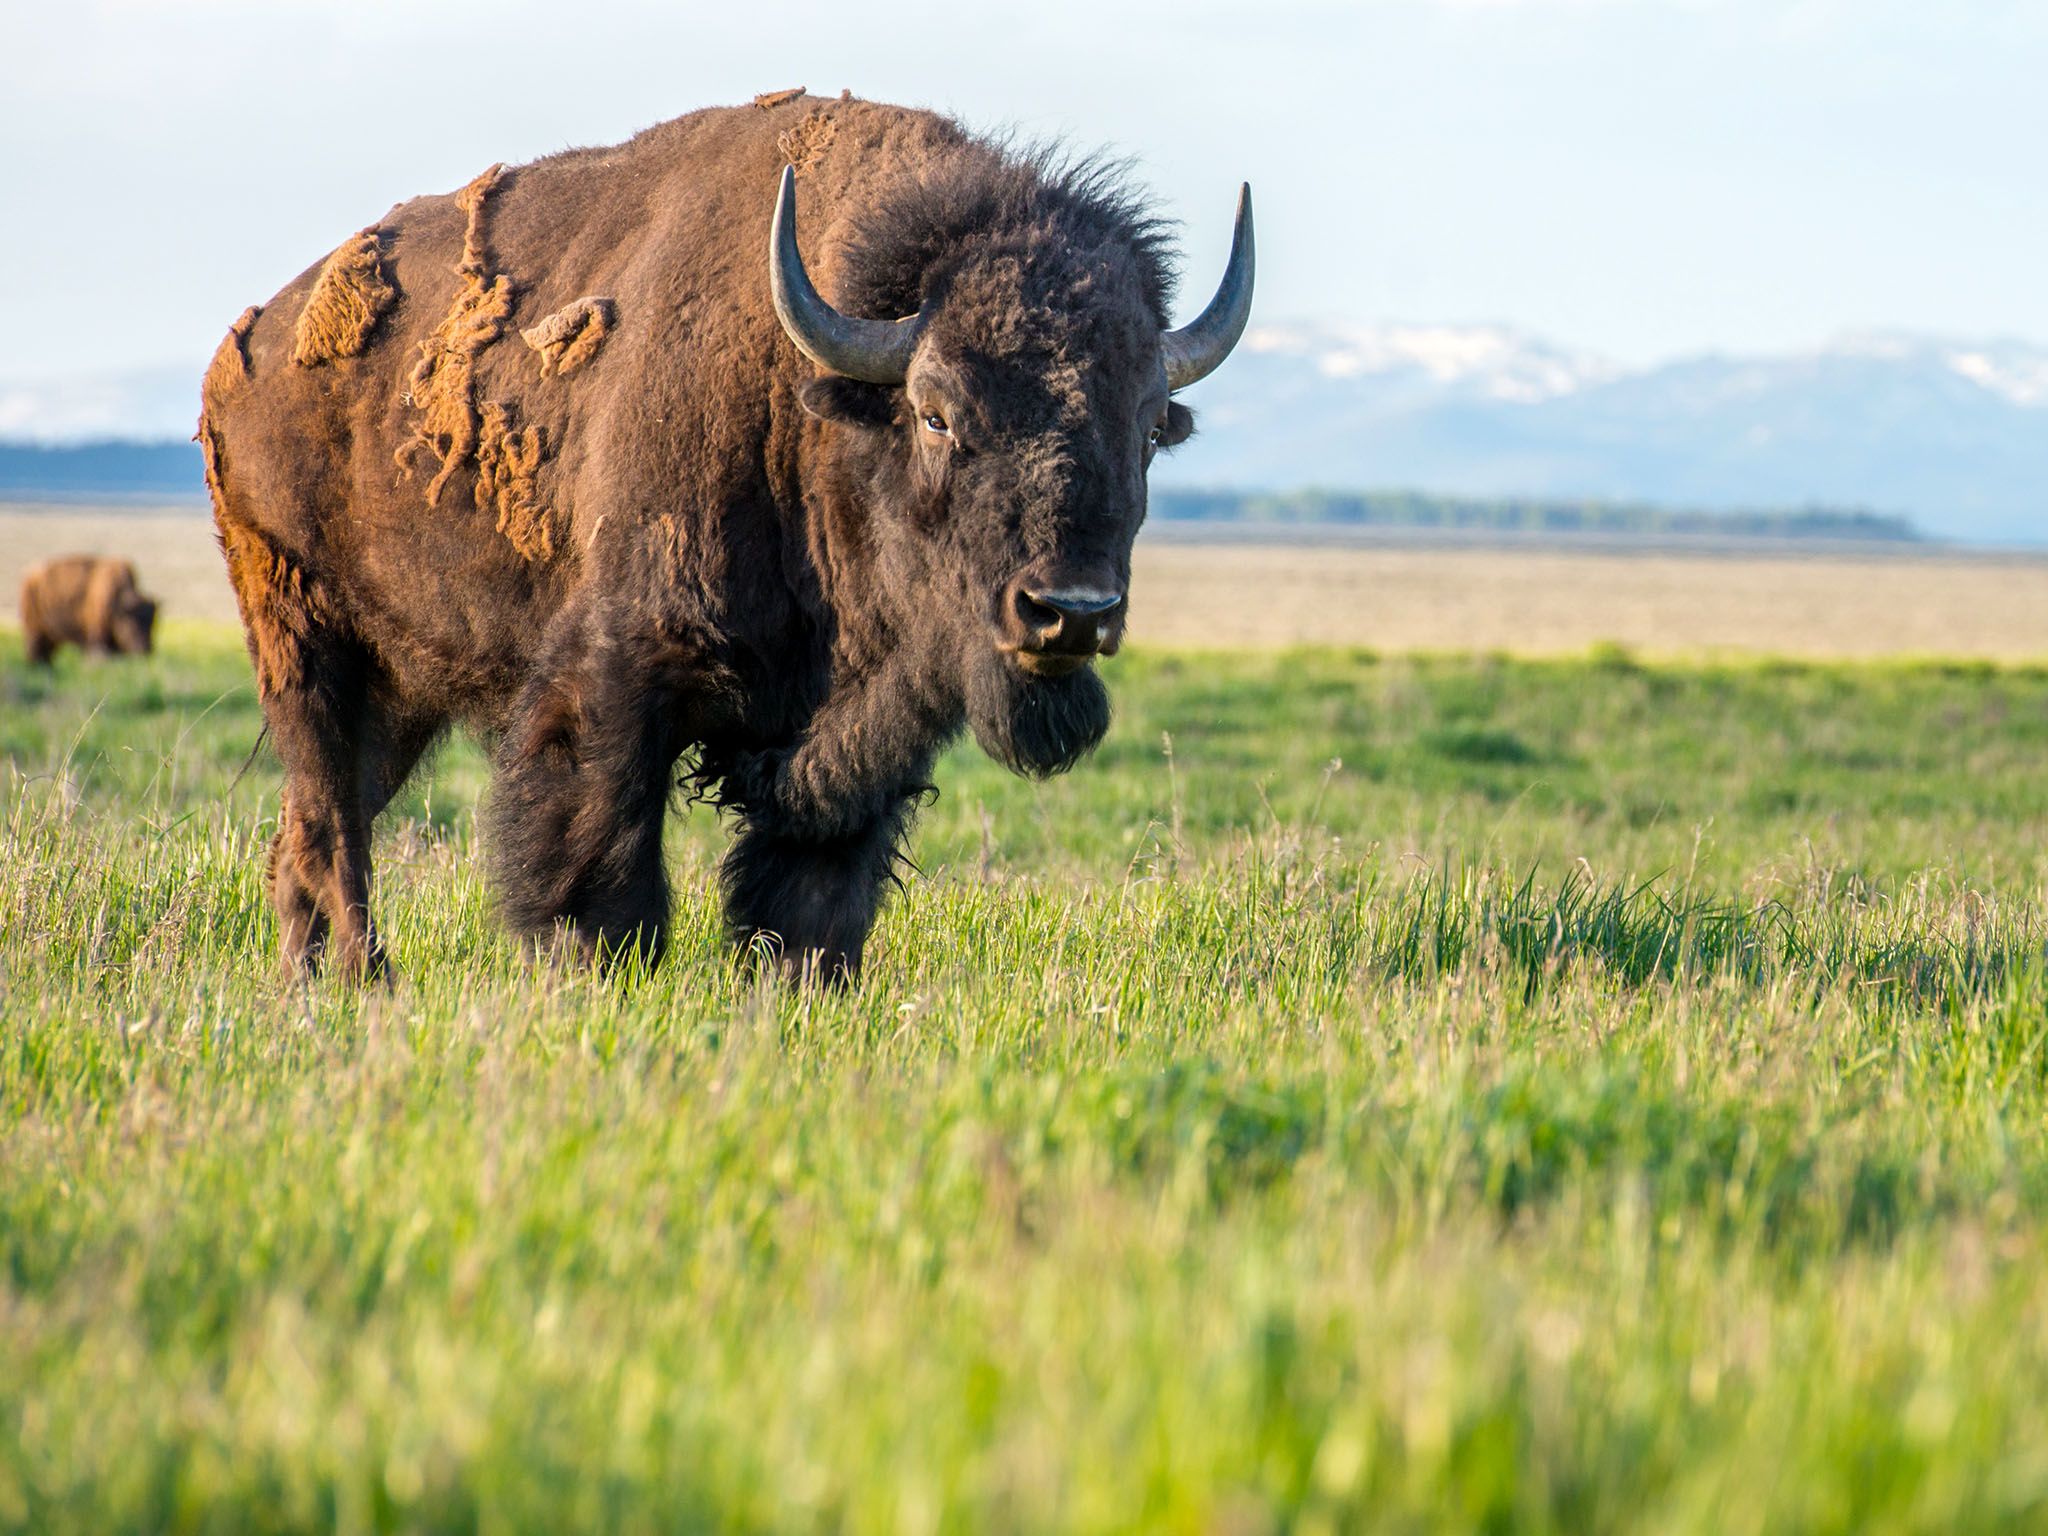 Bison near the Tetons. This image is from Wild Yellowstone. [Photo of the day - November 2015]